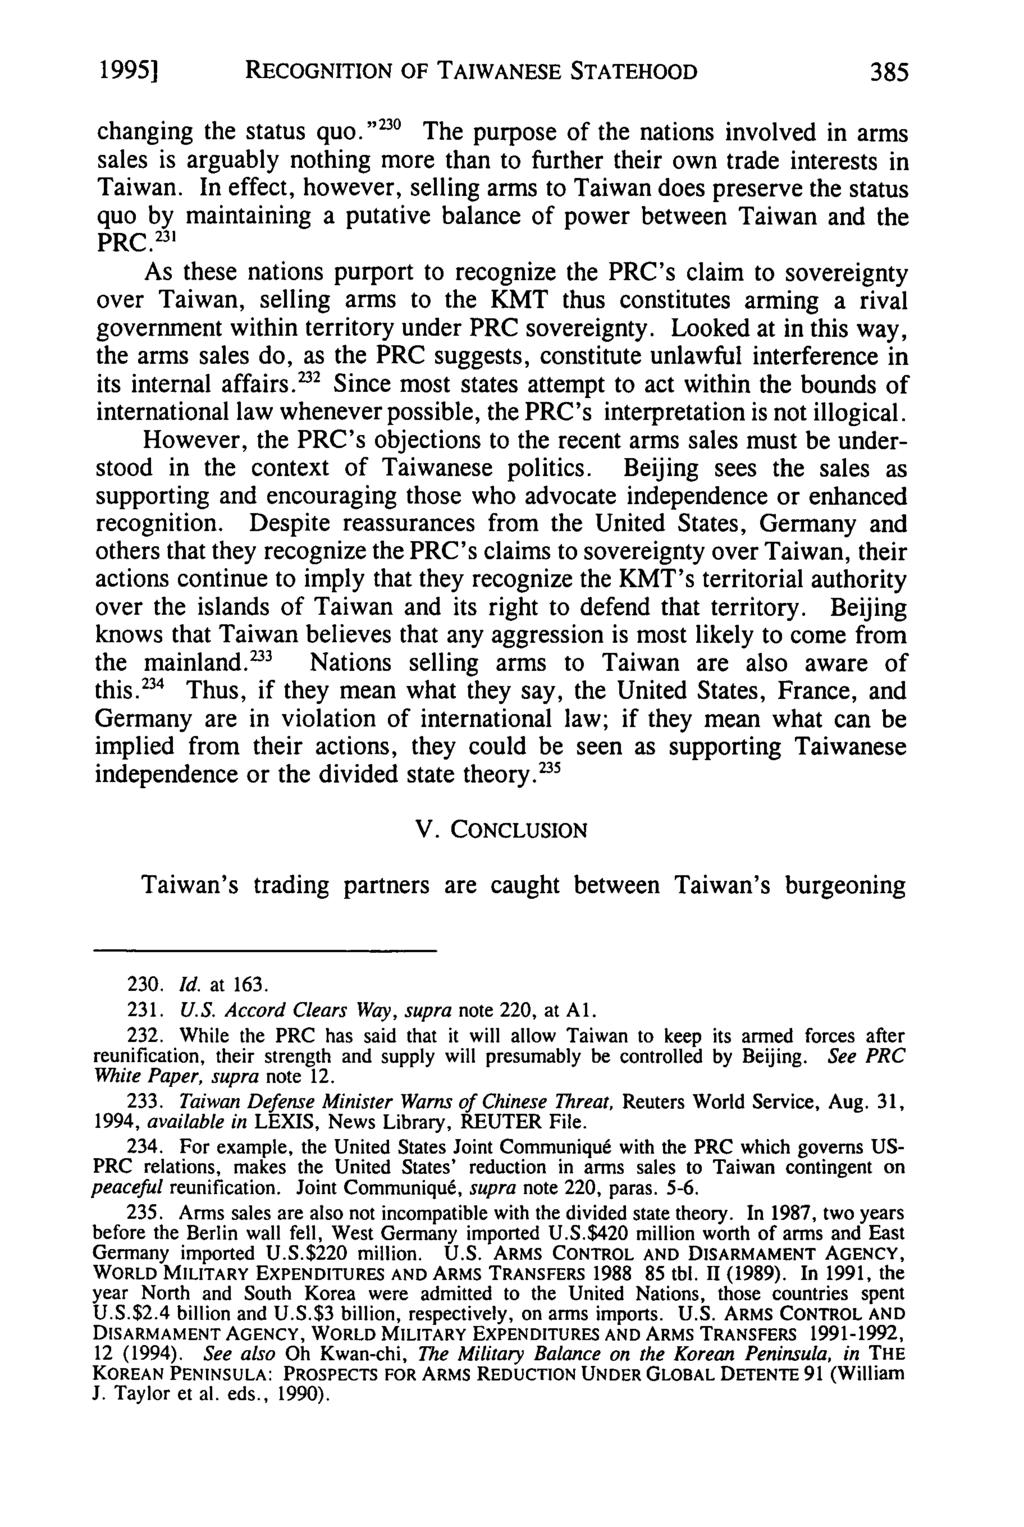 19951 Attix: Between RECOGNITION the Devil and OF the TAIWANESE Deep Blue Sea: Are Taiwan's Trading Par STATEHOOD changing the status quo.